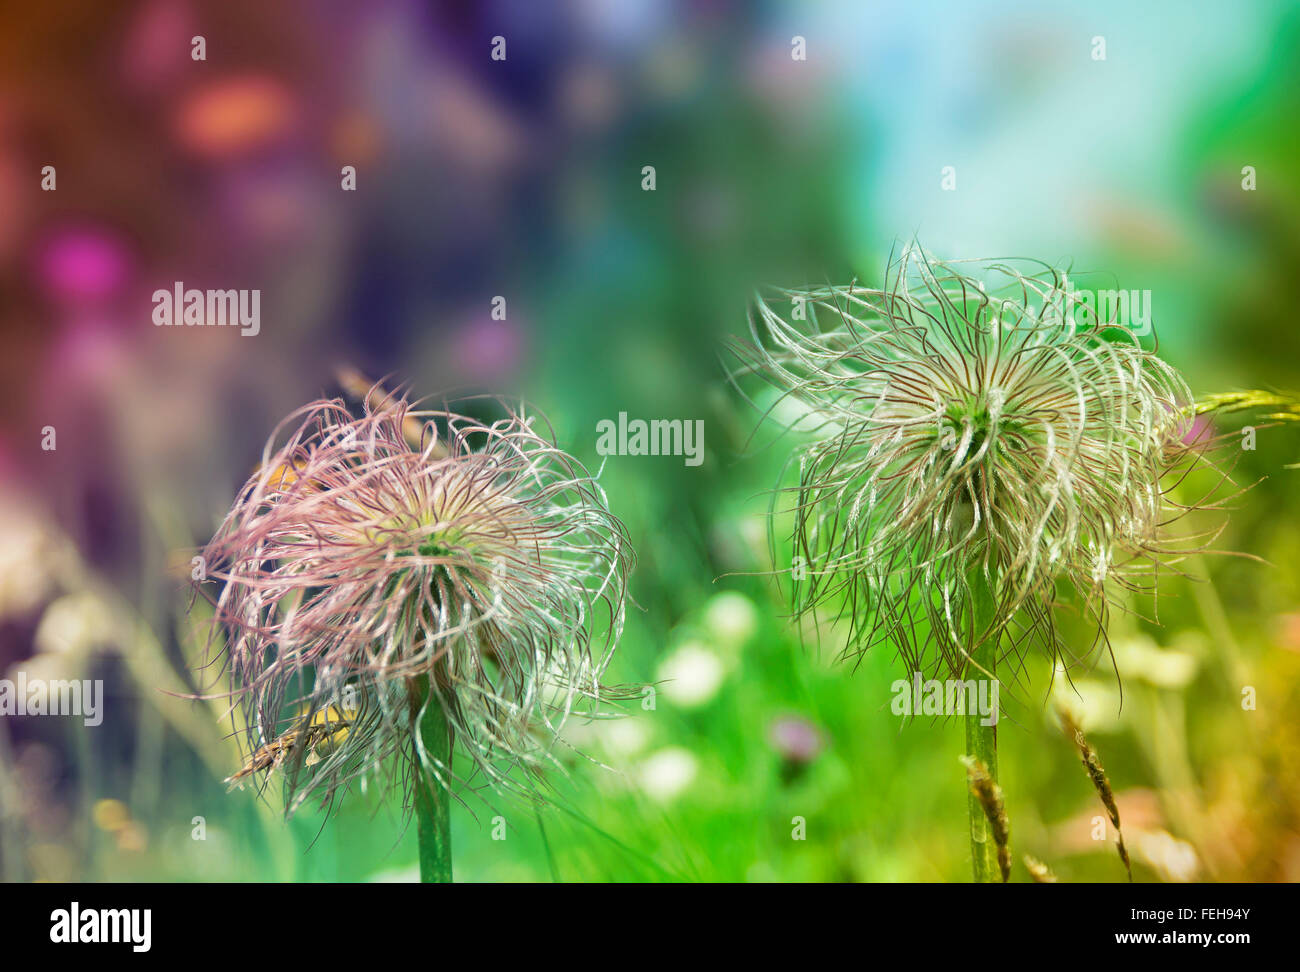 Wallpaper floral background .Creative style with colored filters. Pulsatilla vulgaris (Alpine pasque flower), Alps mountains. Stock Photo